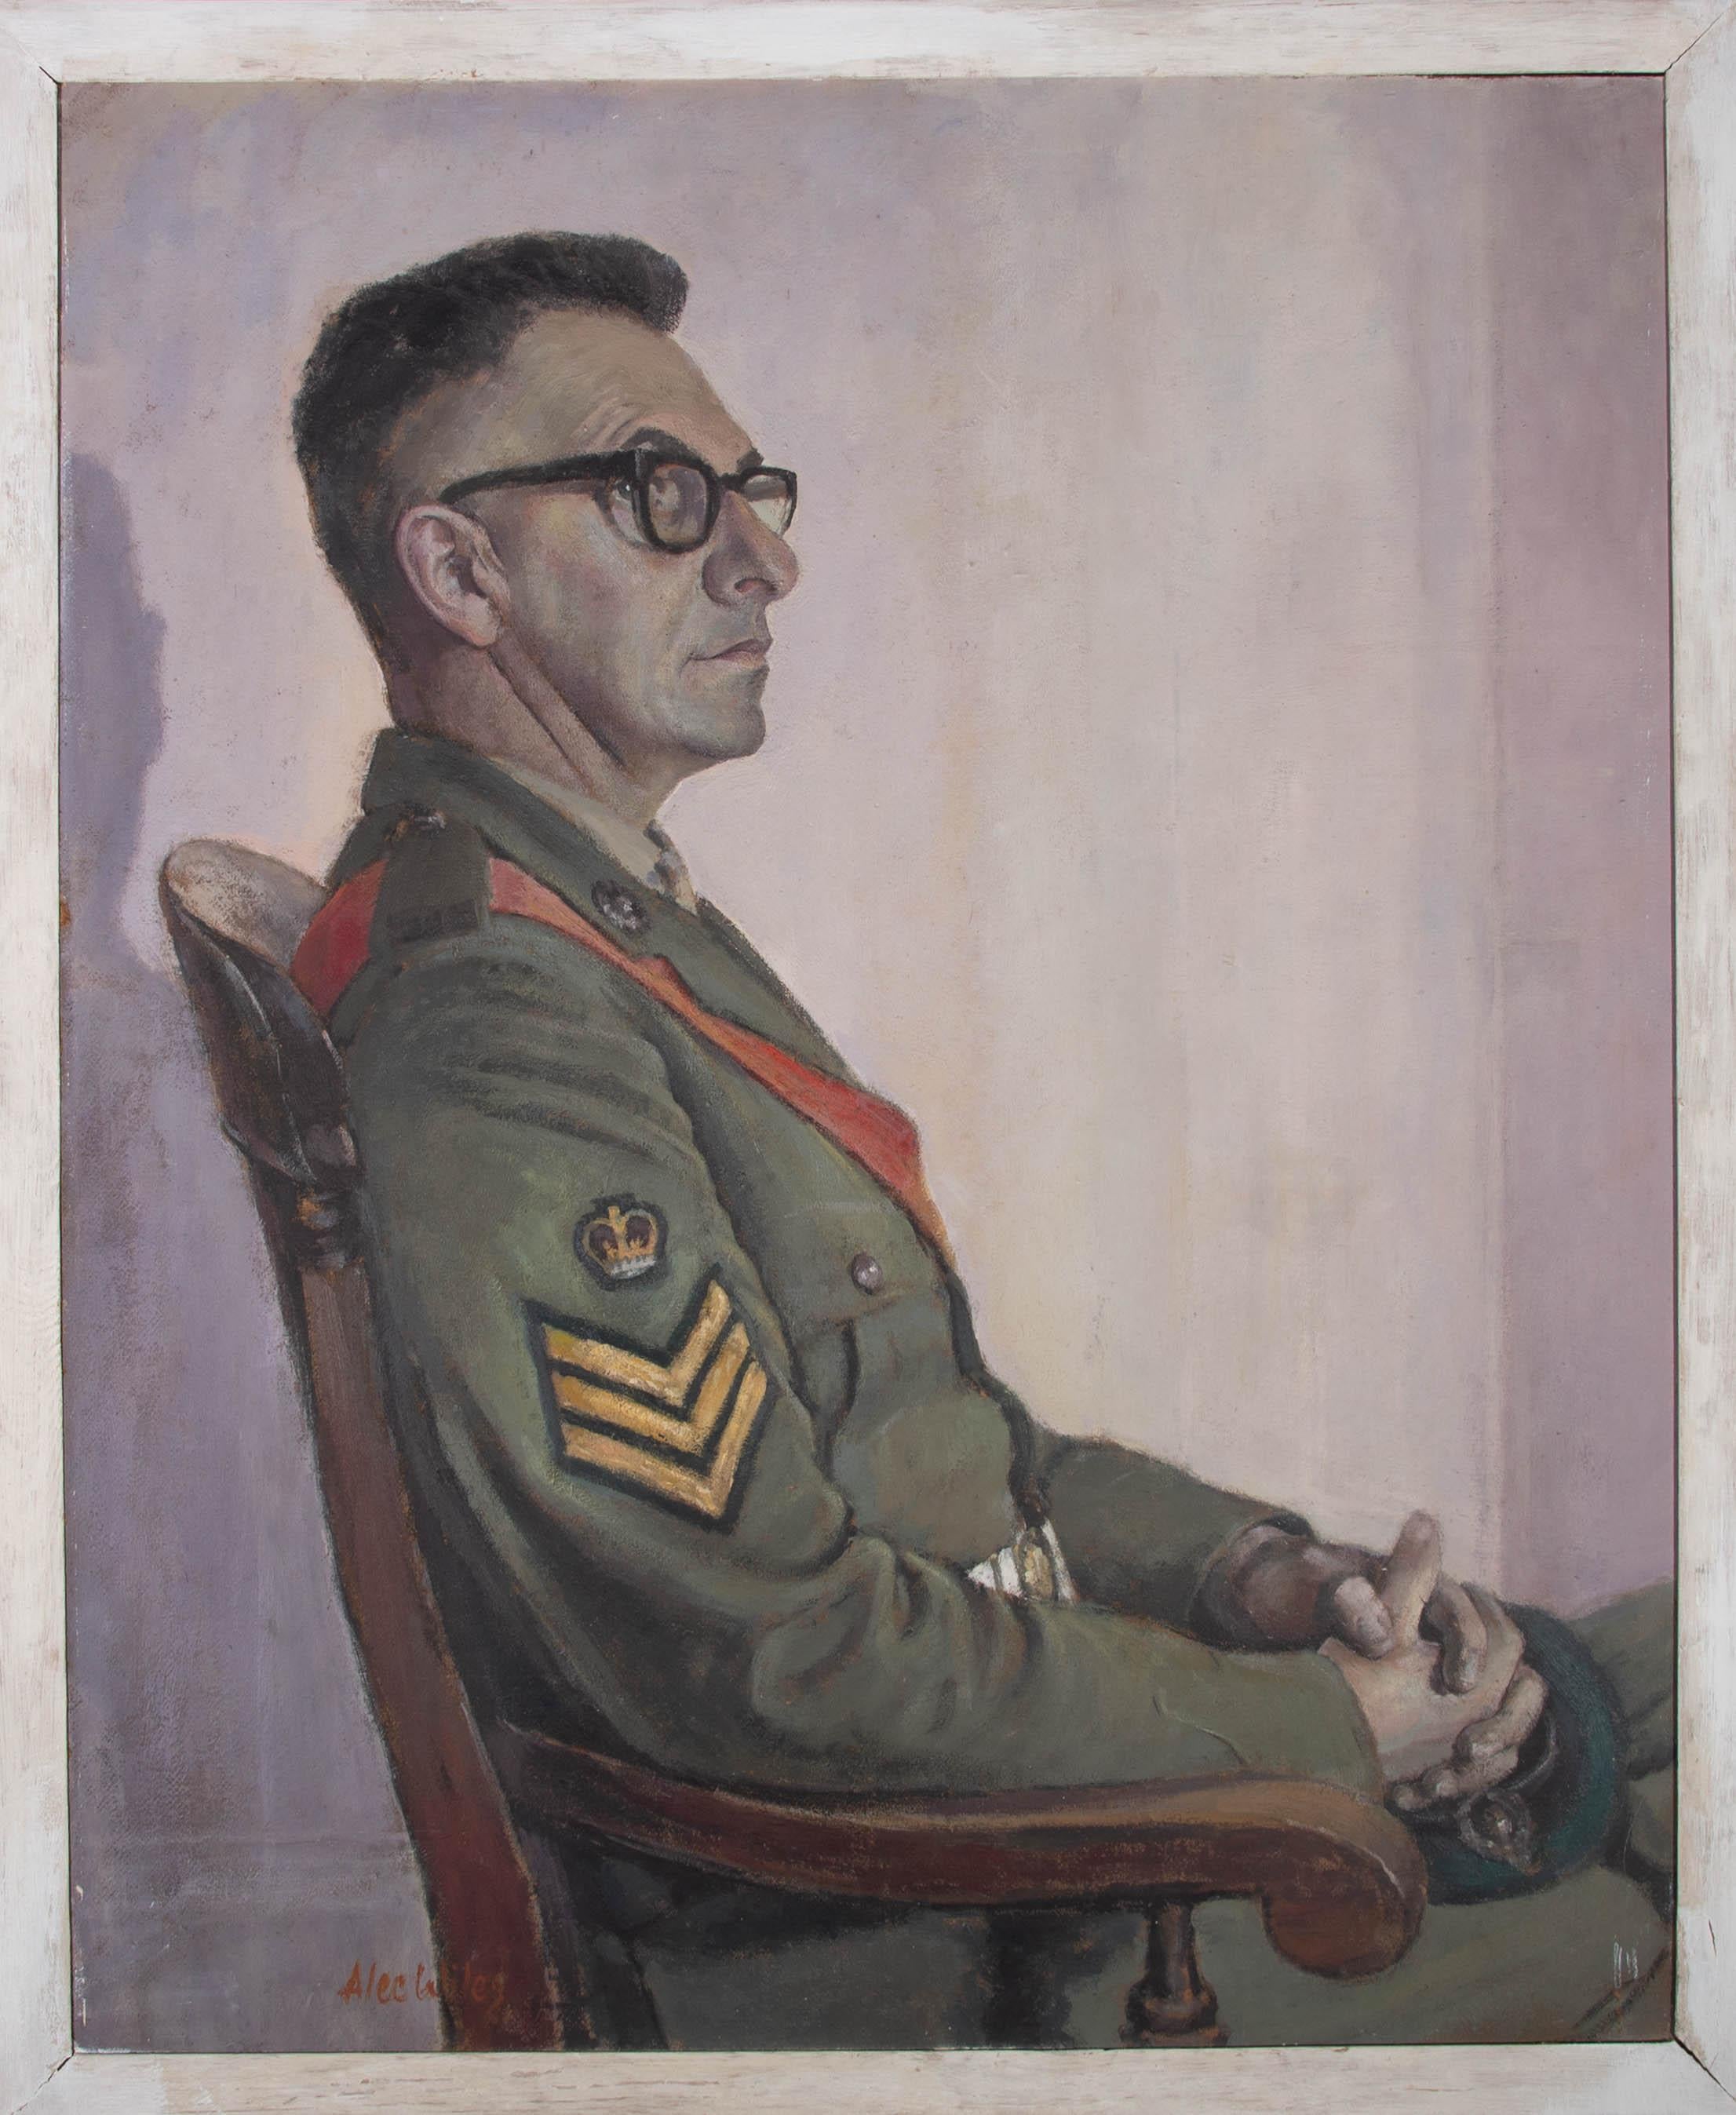 A large and finely executed portrait of a sergeant in the Royal Marines. the holds his green beret in his lap which displays the badge of a Great Globe surrounded by laurels. The posture of the sitter is commanding and assured, seated to the side in